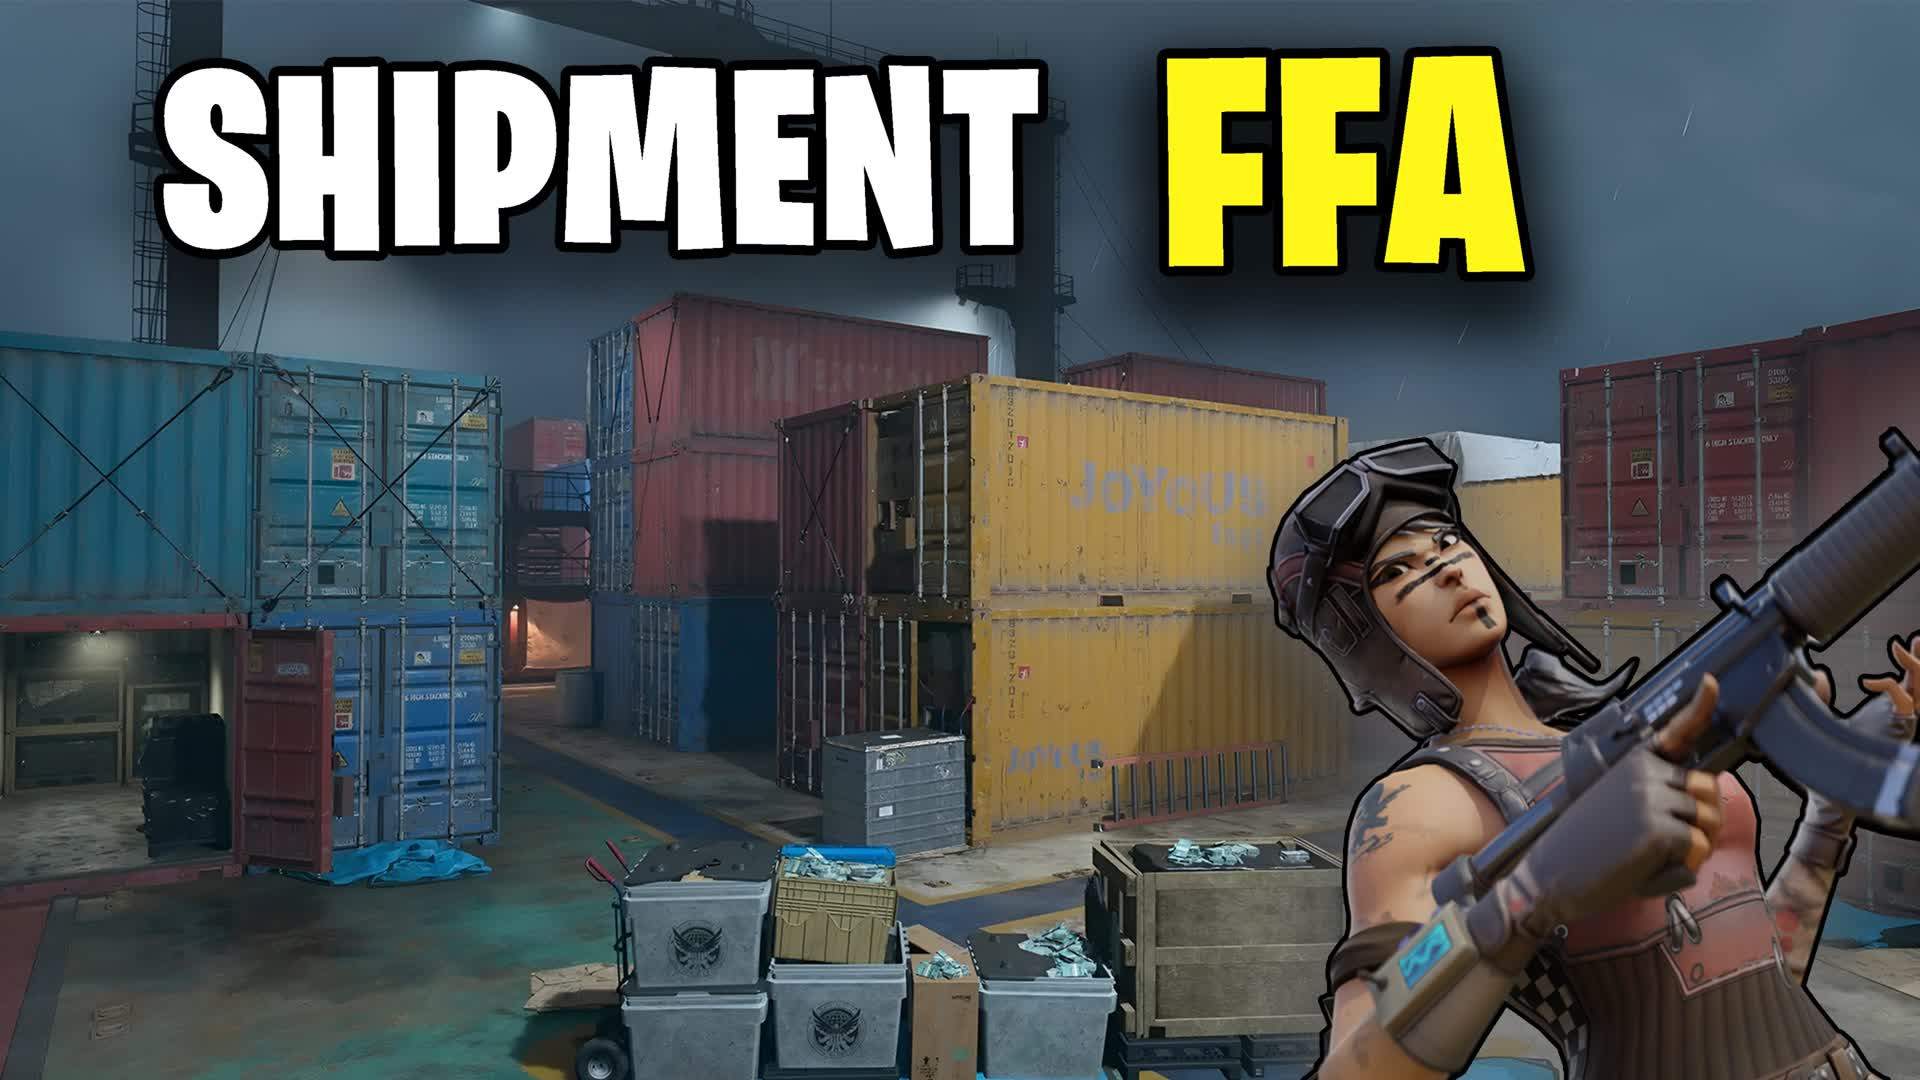 Shipment 24/7 - Free For All